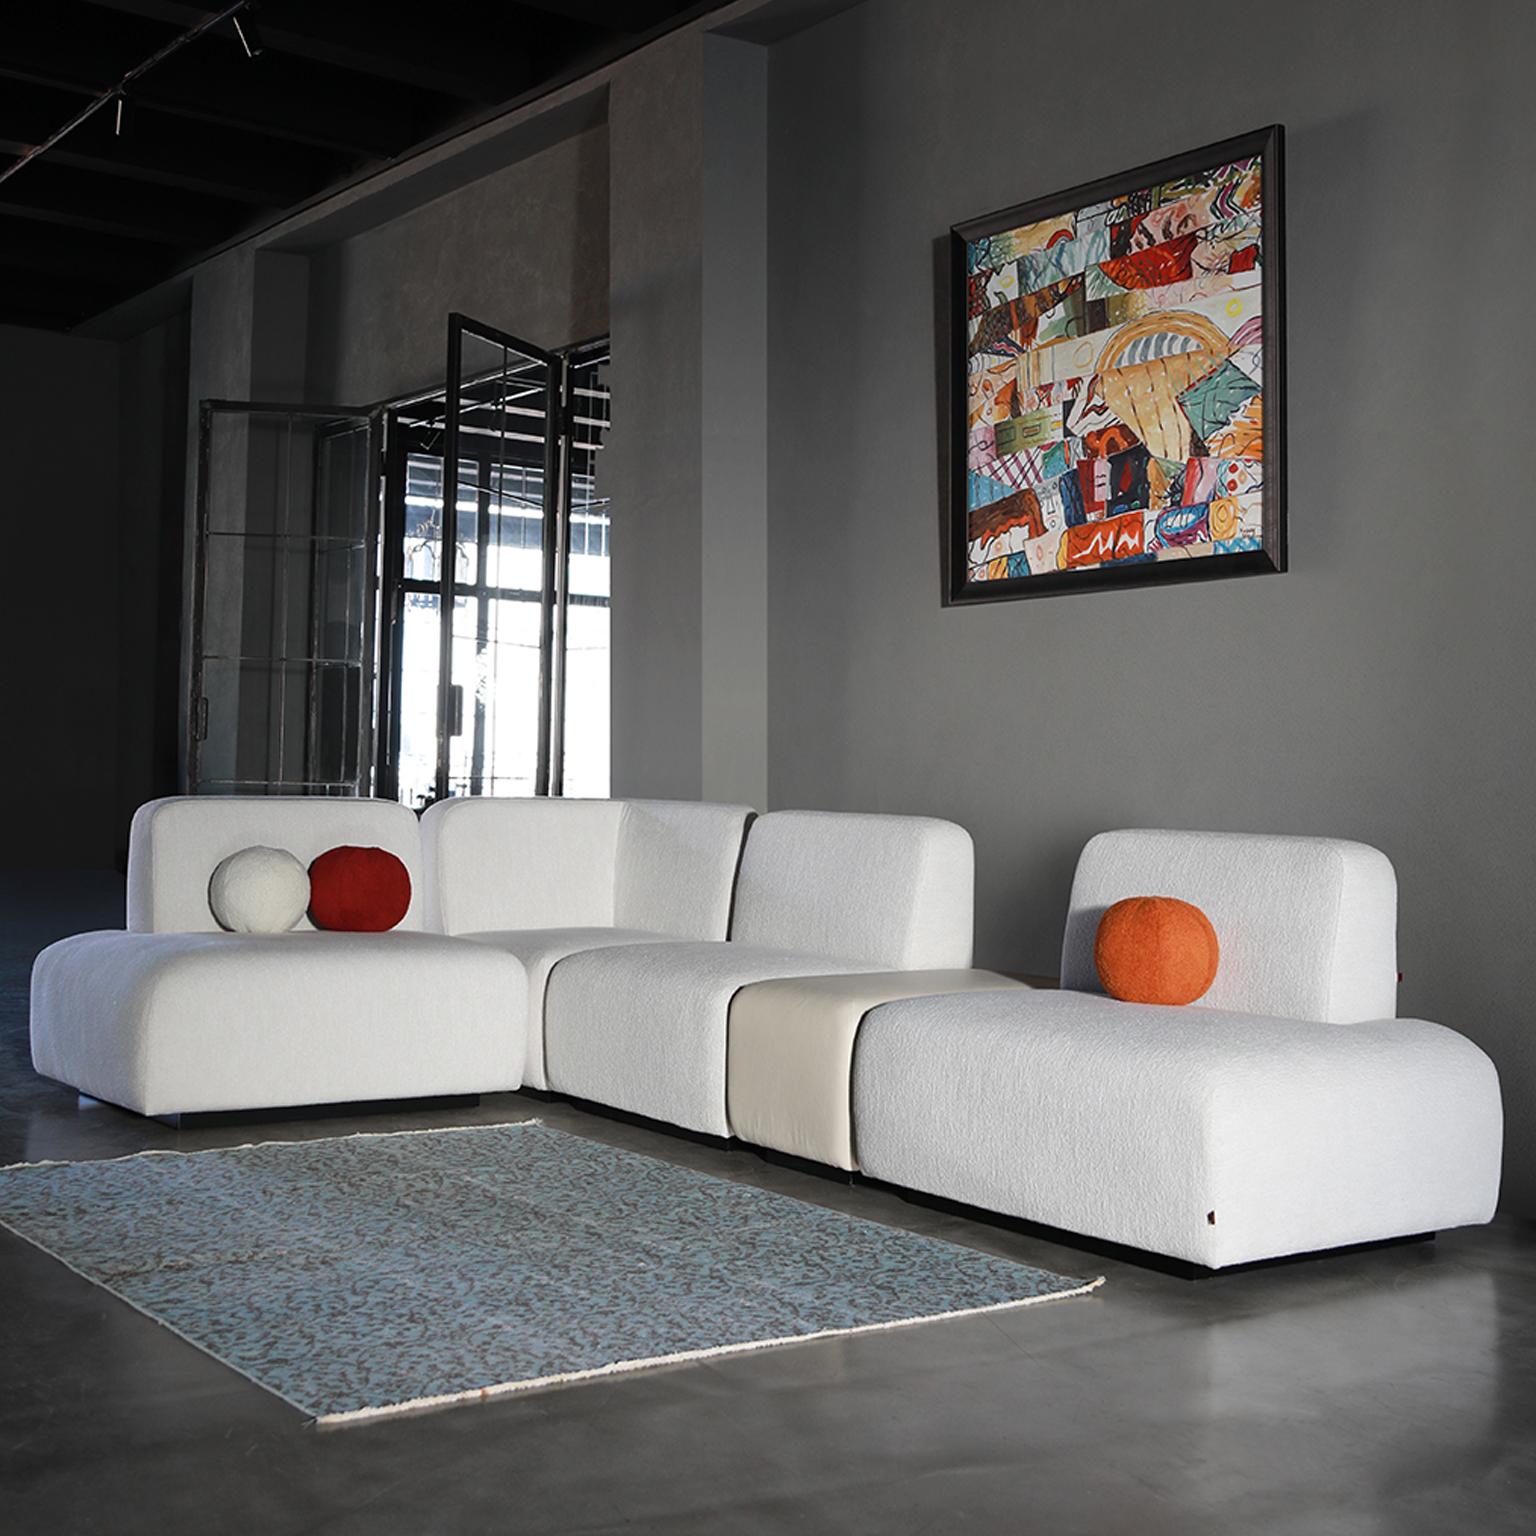 With its sporty form, clean workmanship and understated design that will suit any space, DOTTIE MODULAR L SOFA suits your home very well with its function where you can position the intermediate module as you wish...

*Dottie Corner Sectional Sofa